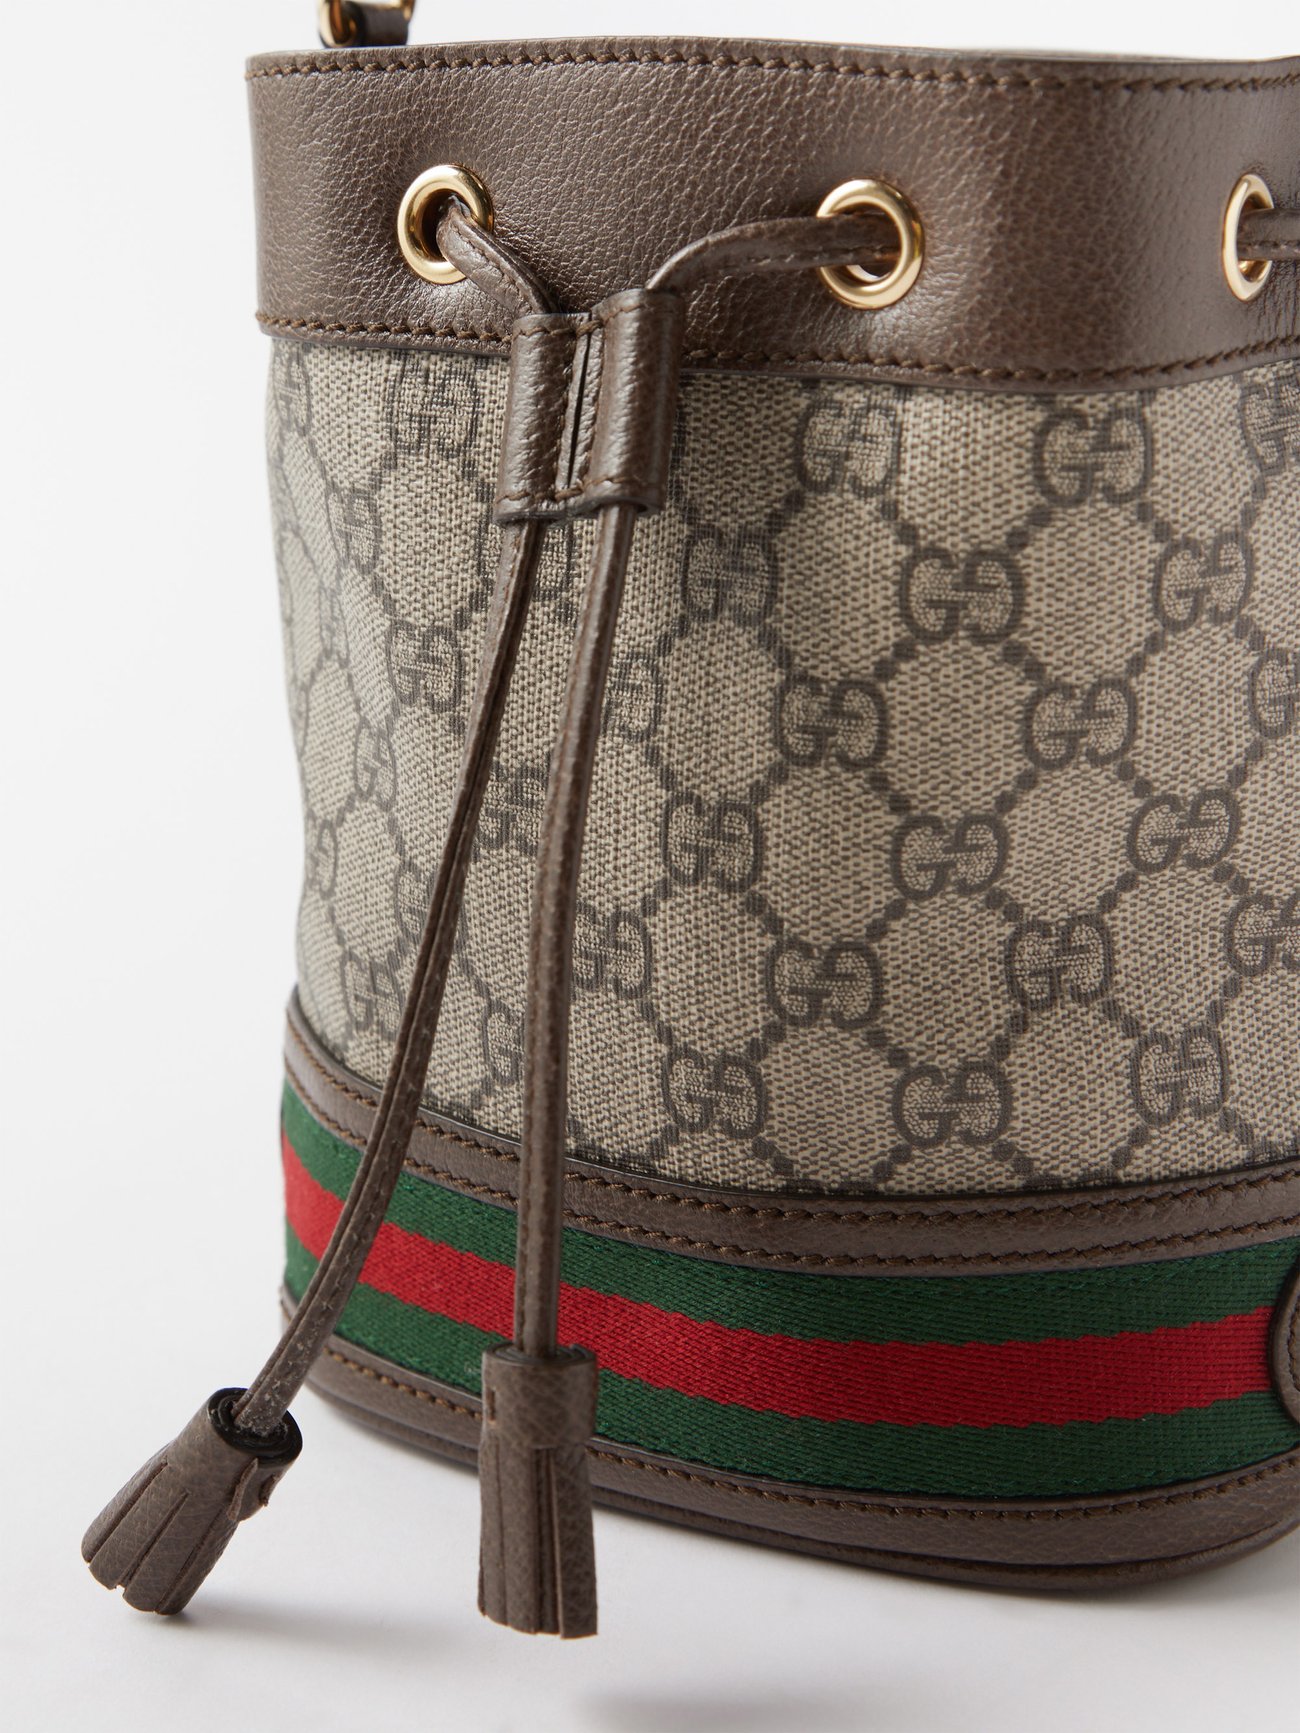 GUCCI Ophidia mini textured leather-trimmed printed coated-canvas bucket bag